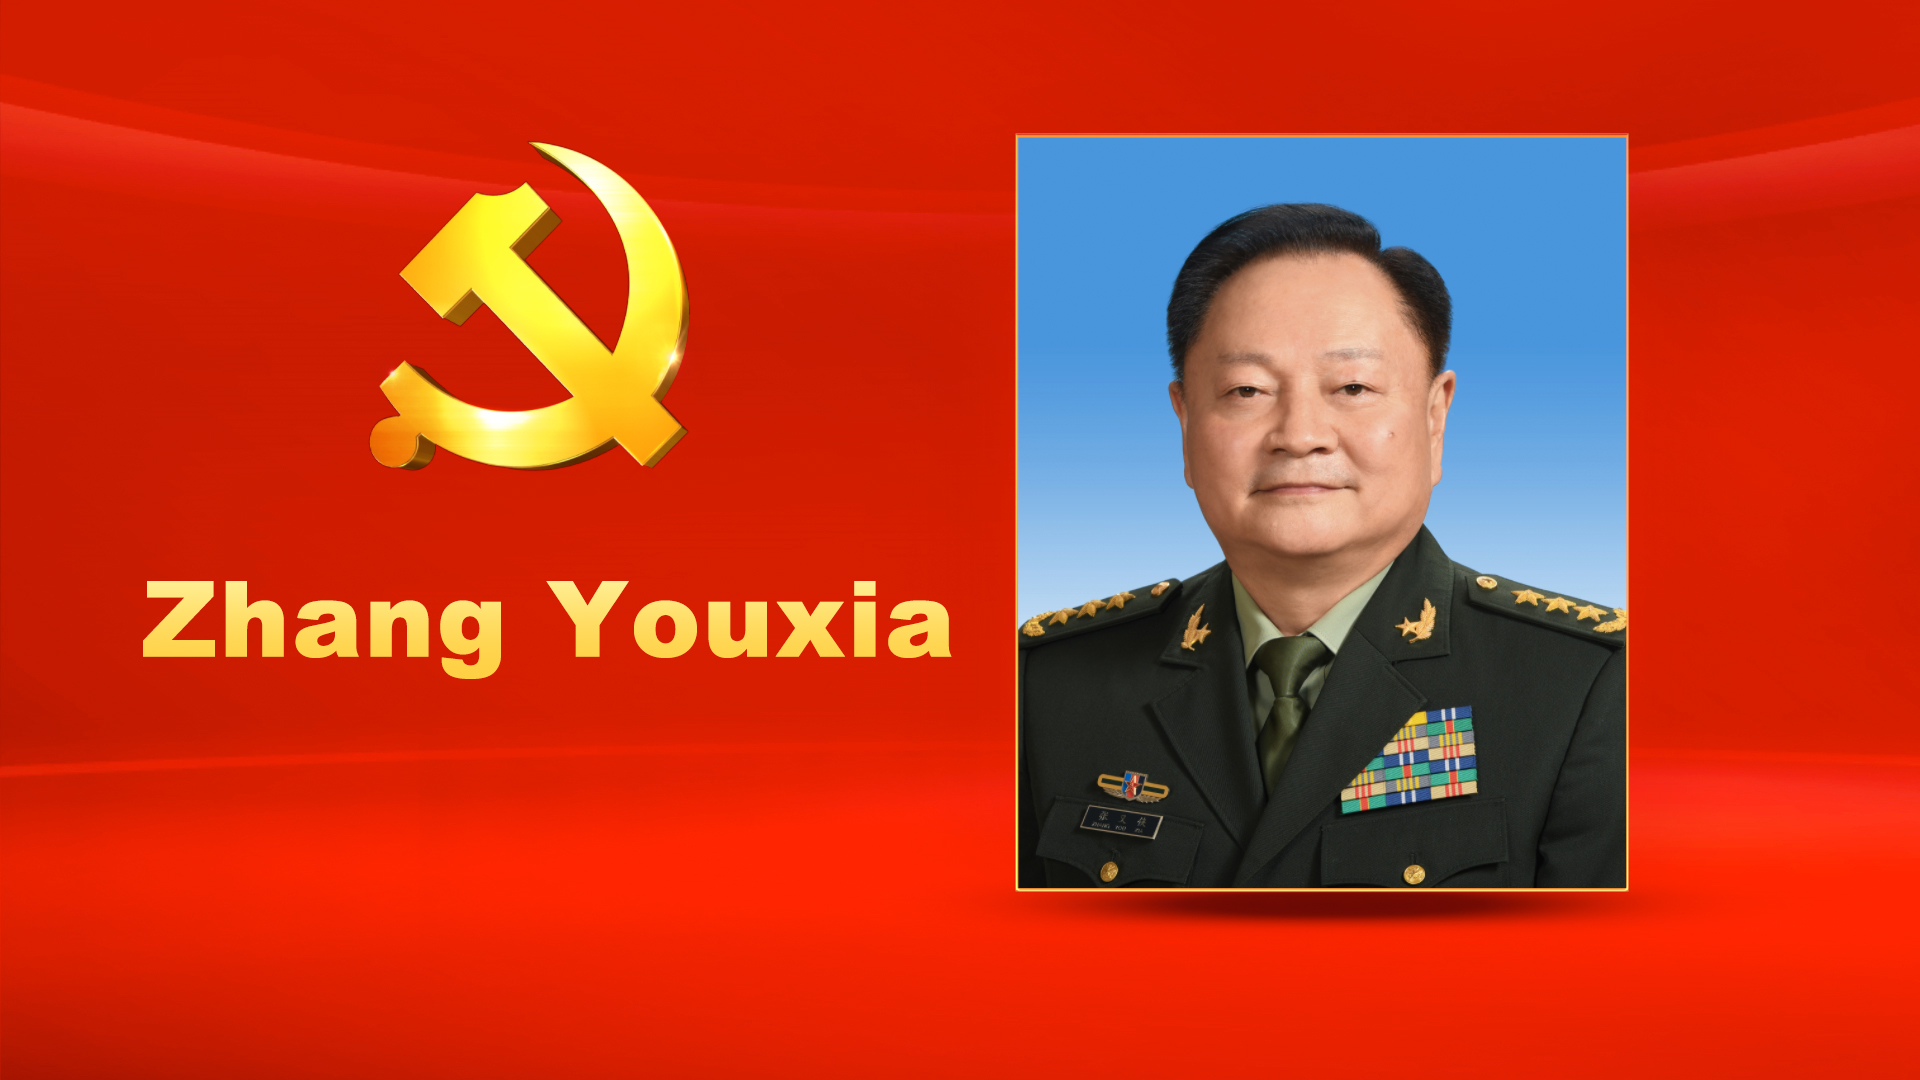 Zhang Youxia, male, Han ethnicity, was born in July 1950 and is from Weinan, Shaanxi Province. He joined the People's Liberation Army (PLA) in December 1968 and the Communist Party of China (CPC) in May 1969. He graduated from the Basic Department of the PLA Military Academy and received a junior college education. Zhang is currently a member of the CPC Central Committee Political Bureau, Vice Chairman of the CPC Central Military Commission, and Vice Chairman of the Central Military Commission of the People's Republic of China. He holds the rank of general in the PLA Ground Force.